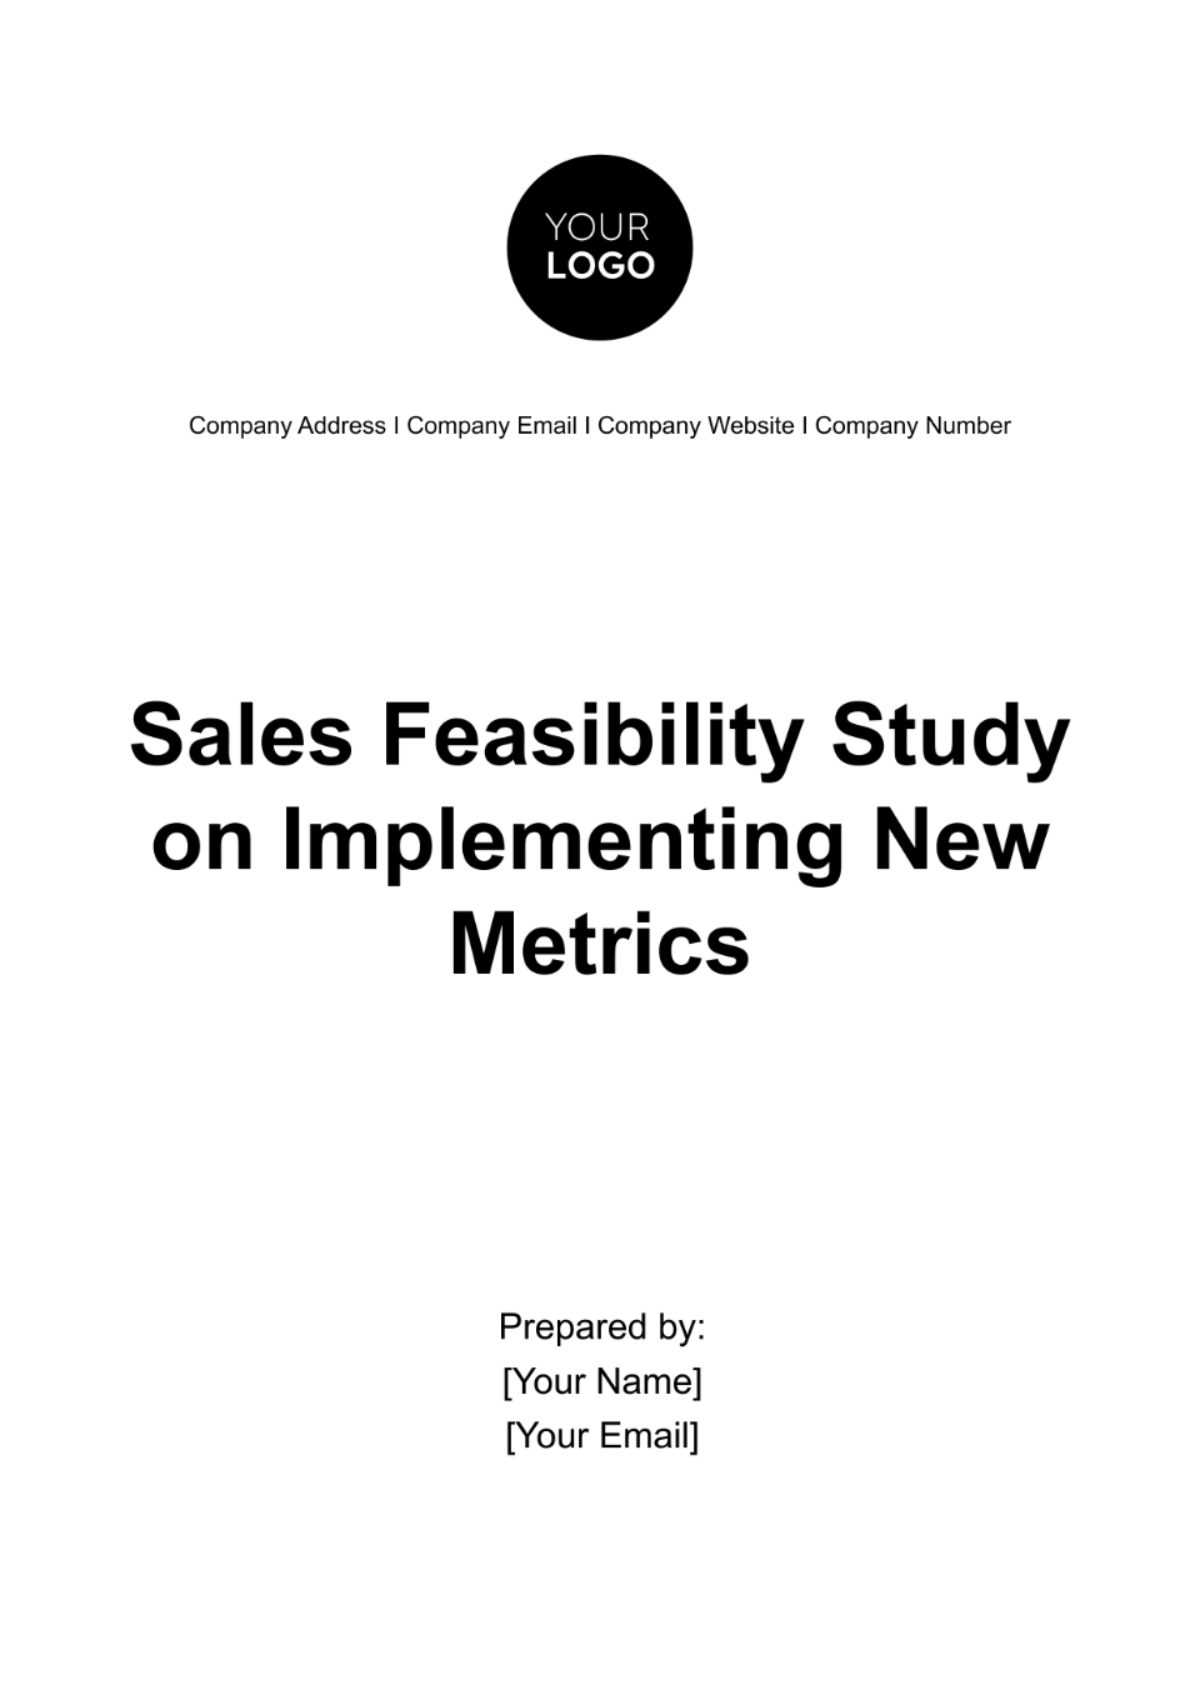 Sales Feasibility Study on Implementing New Metrics Template